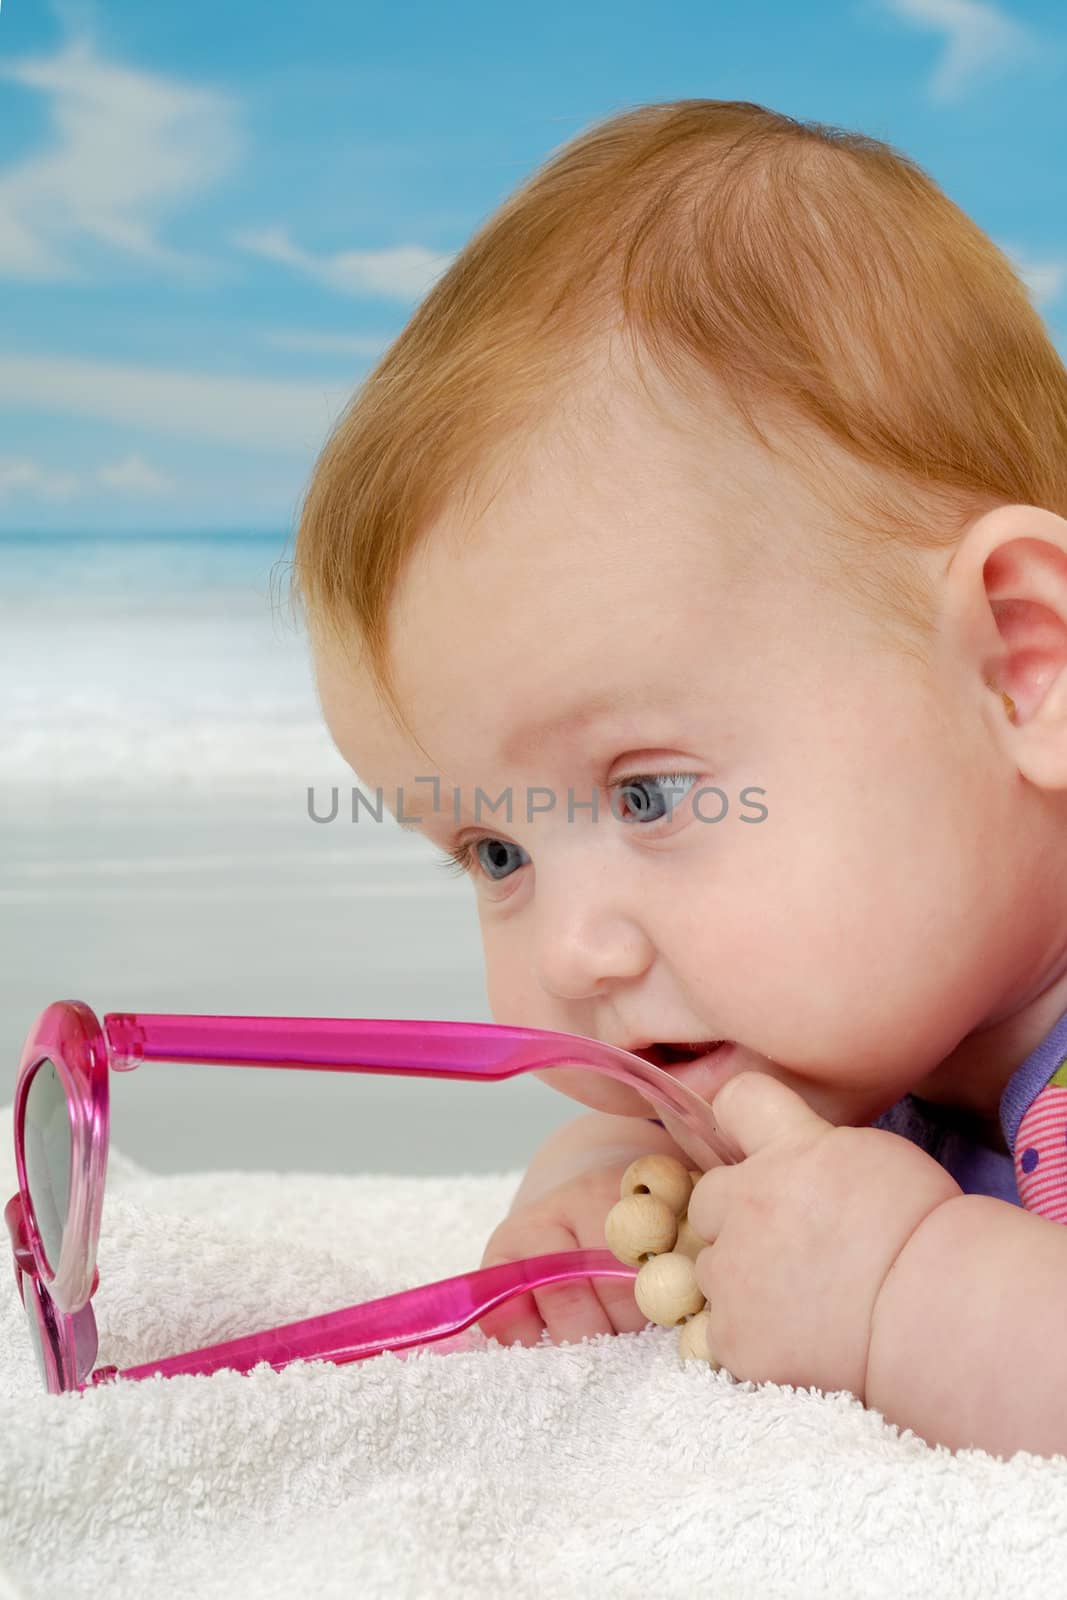 Sweet baby on vacation on beach with the sea in the background.